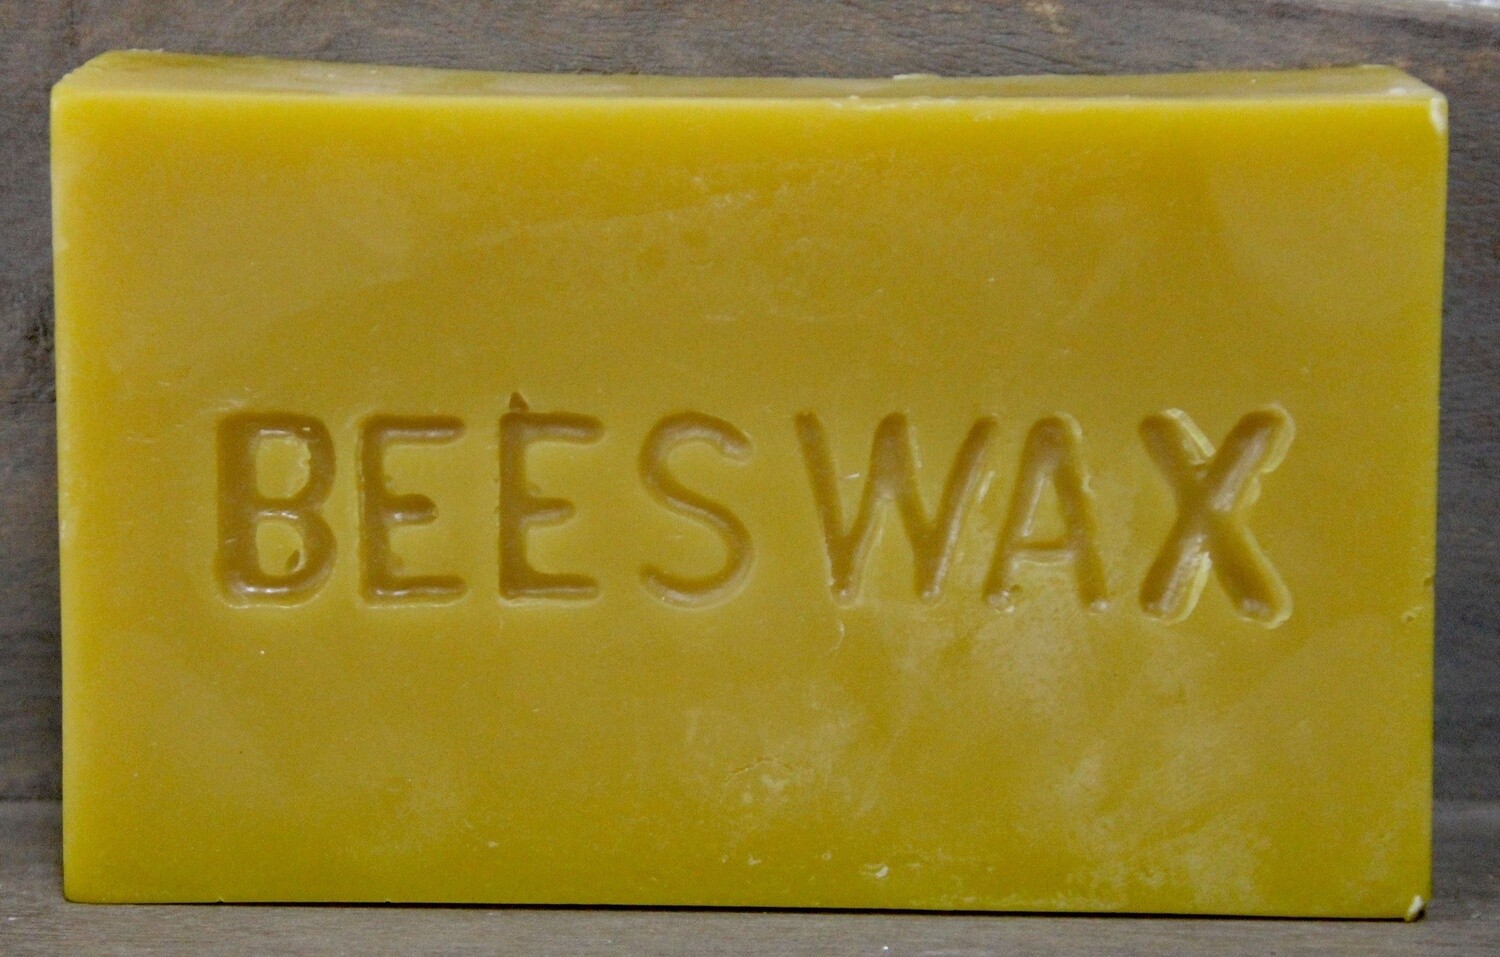 Beeswax Candles - Rudy's Honey